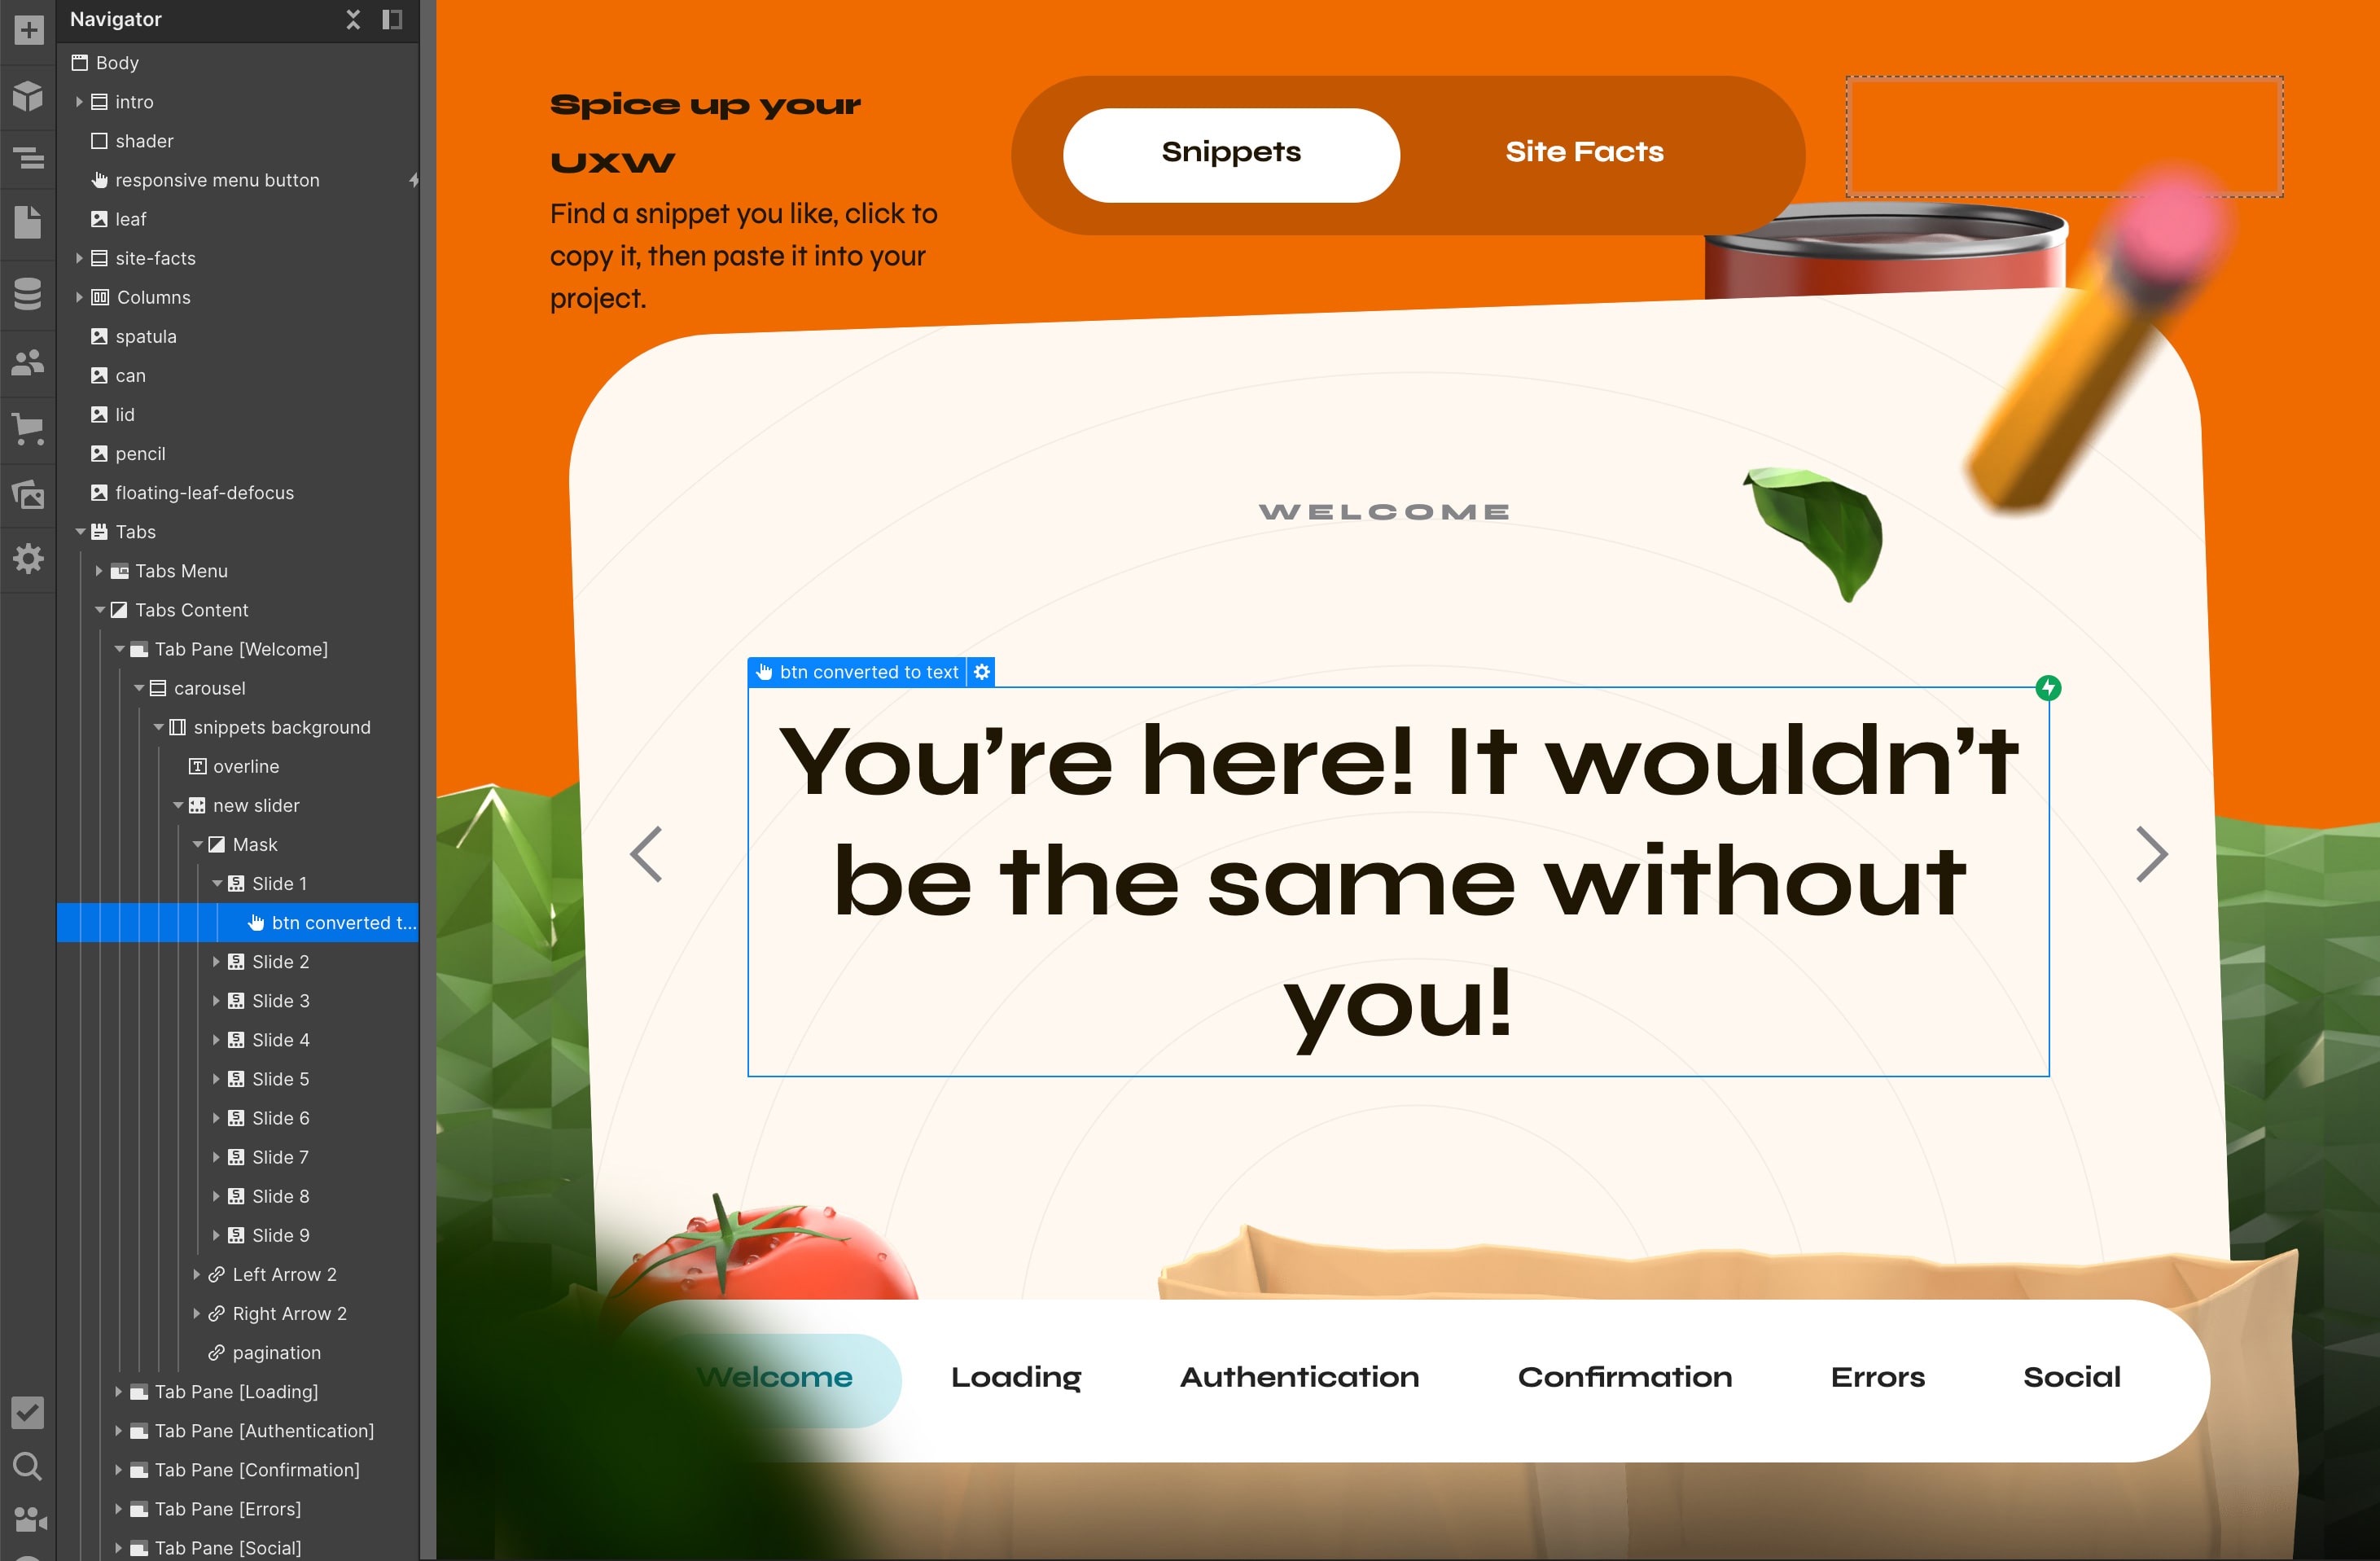 Interface design showcasing the text "You're here, it wouldn't be the same without you!"